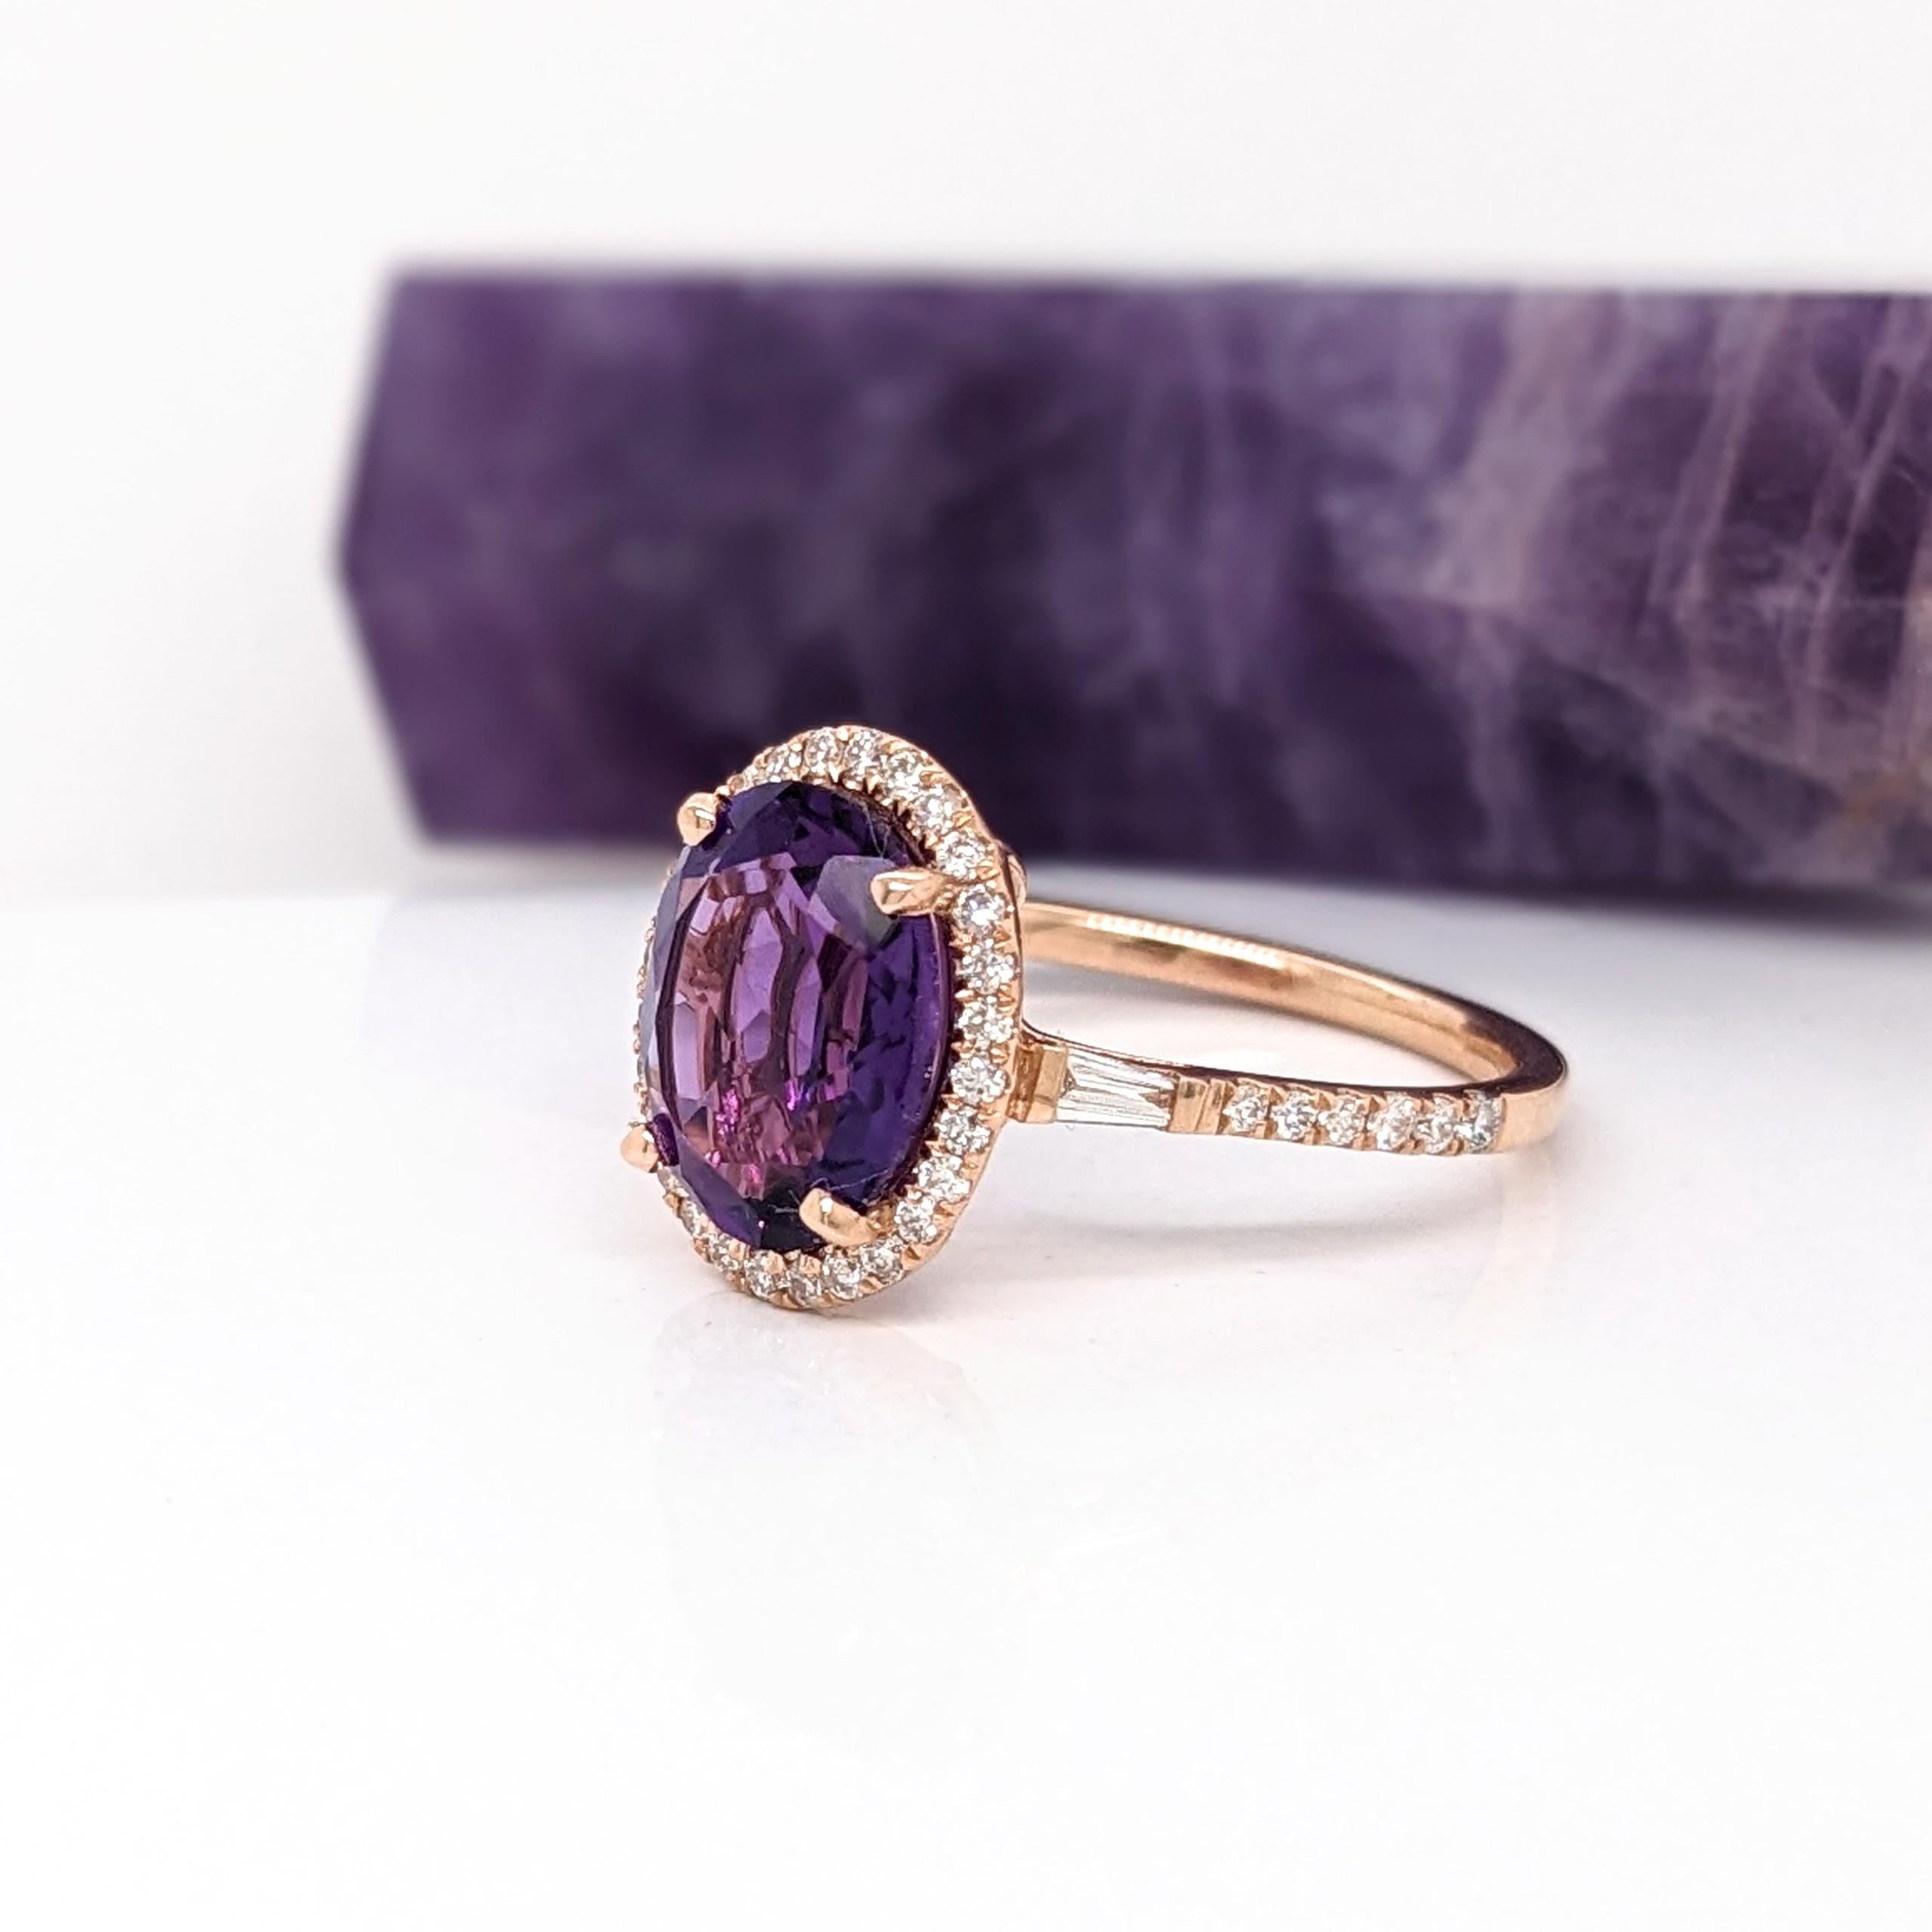 2.3ct Zambian Amethyst Ring w Natural Diamonds in Solid 14K Gold Oval 10x8mm